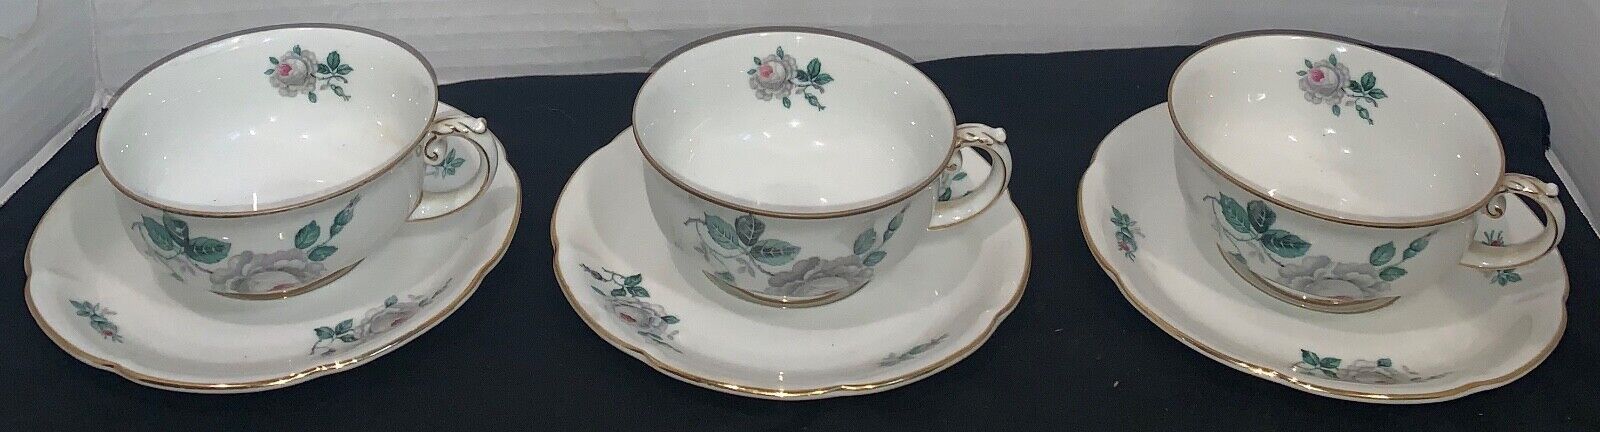 Royal Bayreuth Set of 3 Tea Cups and Saucers Bavaria Germany US Zone